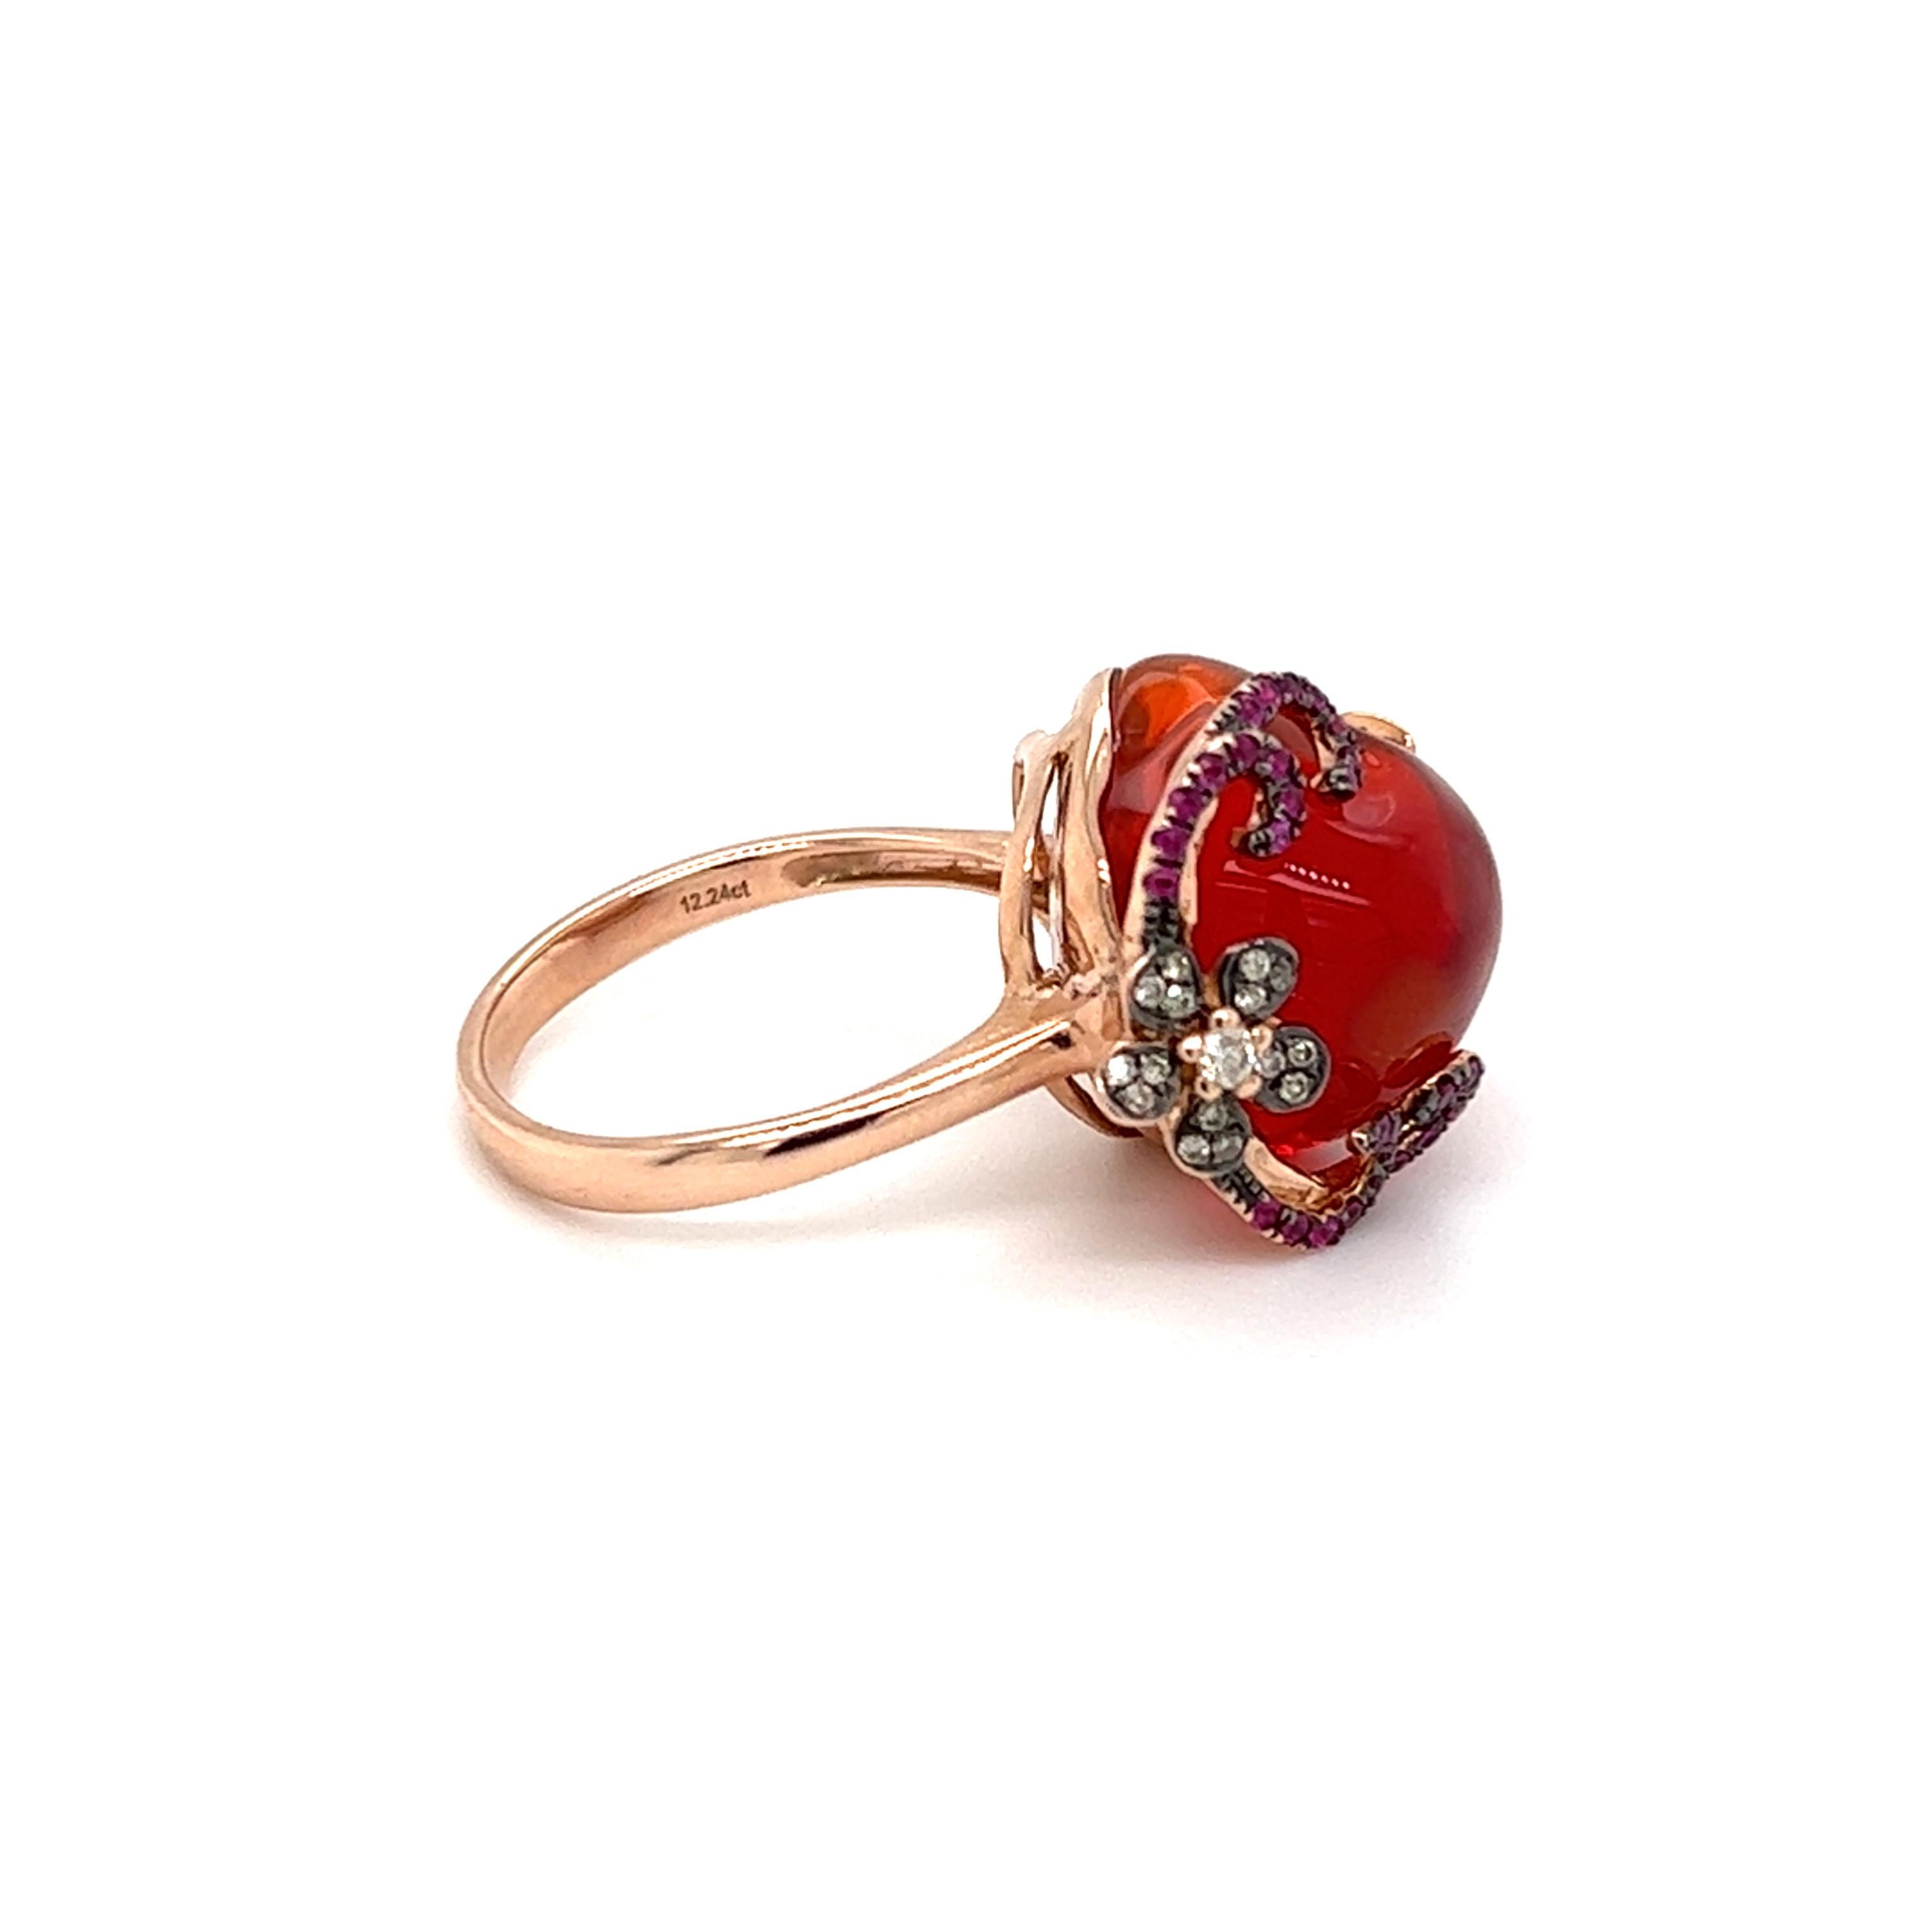 One 14 karat rose gold ring featuring one (1) 12.24-carat polished nugget shape Mexican fire opal, twenty-eight (28)  round brilliant cut diamonds, weighing approximately 0.09-carat total weight with matching top light brown color and VS clarity,